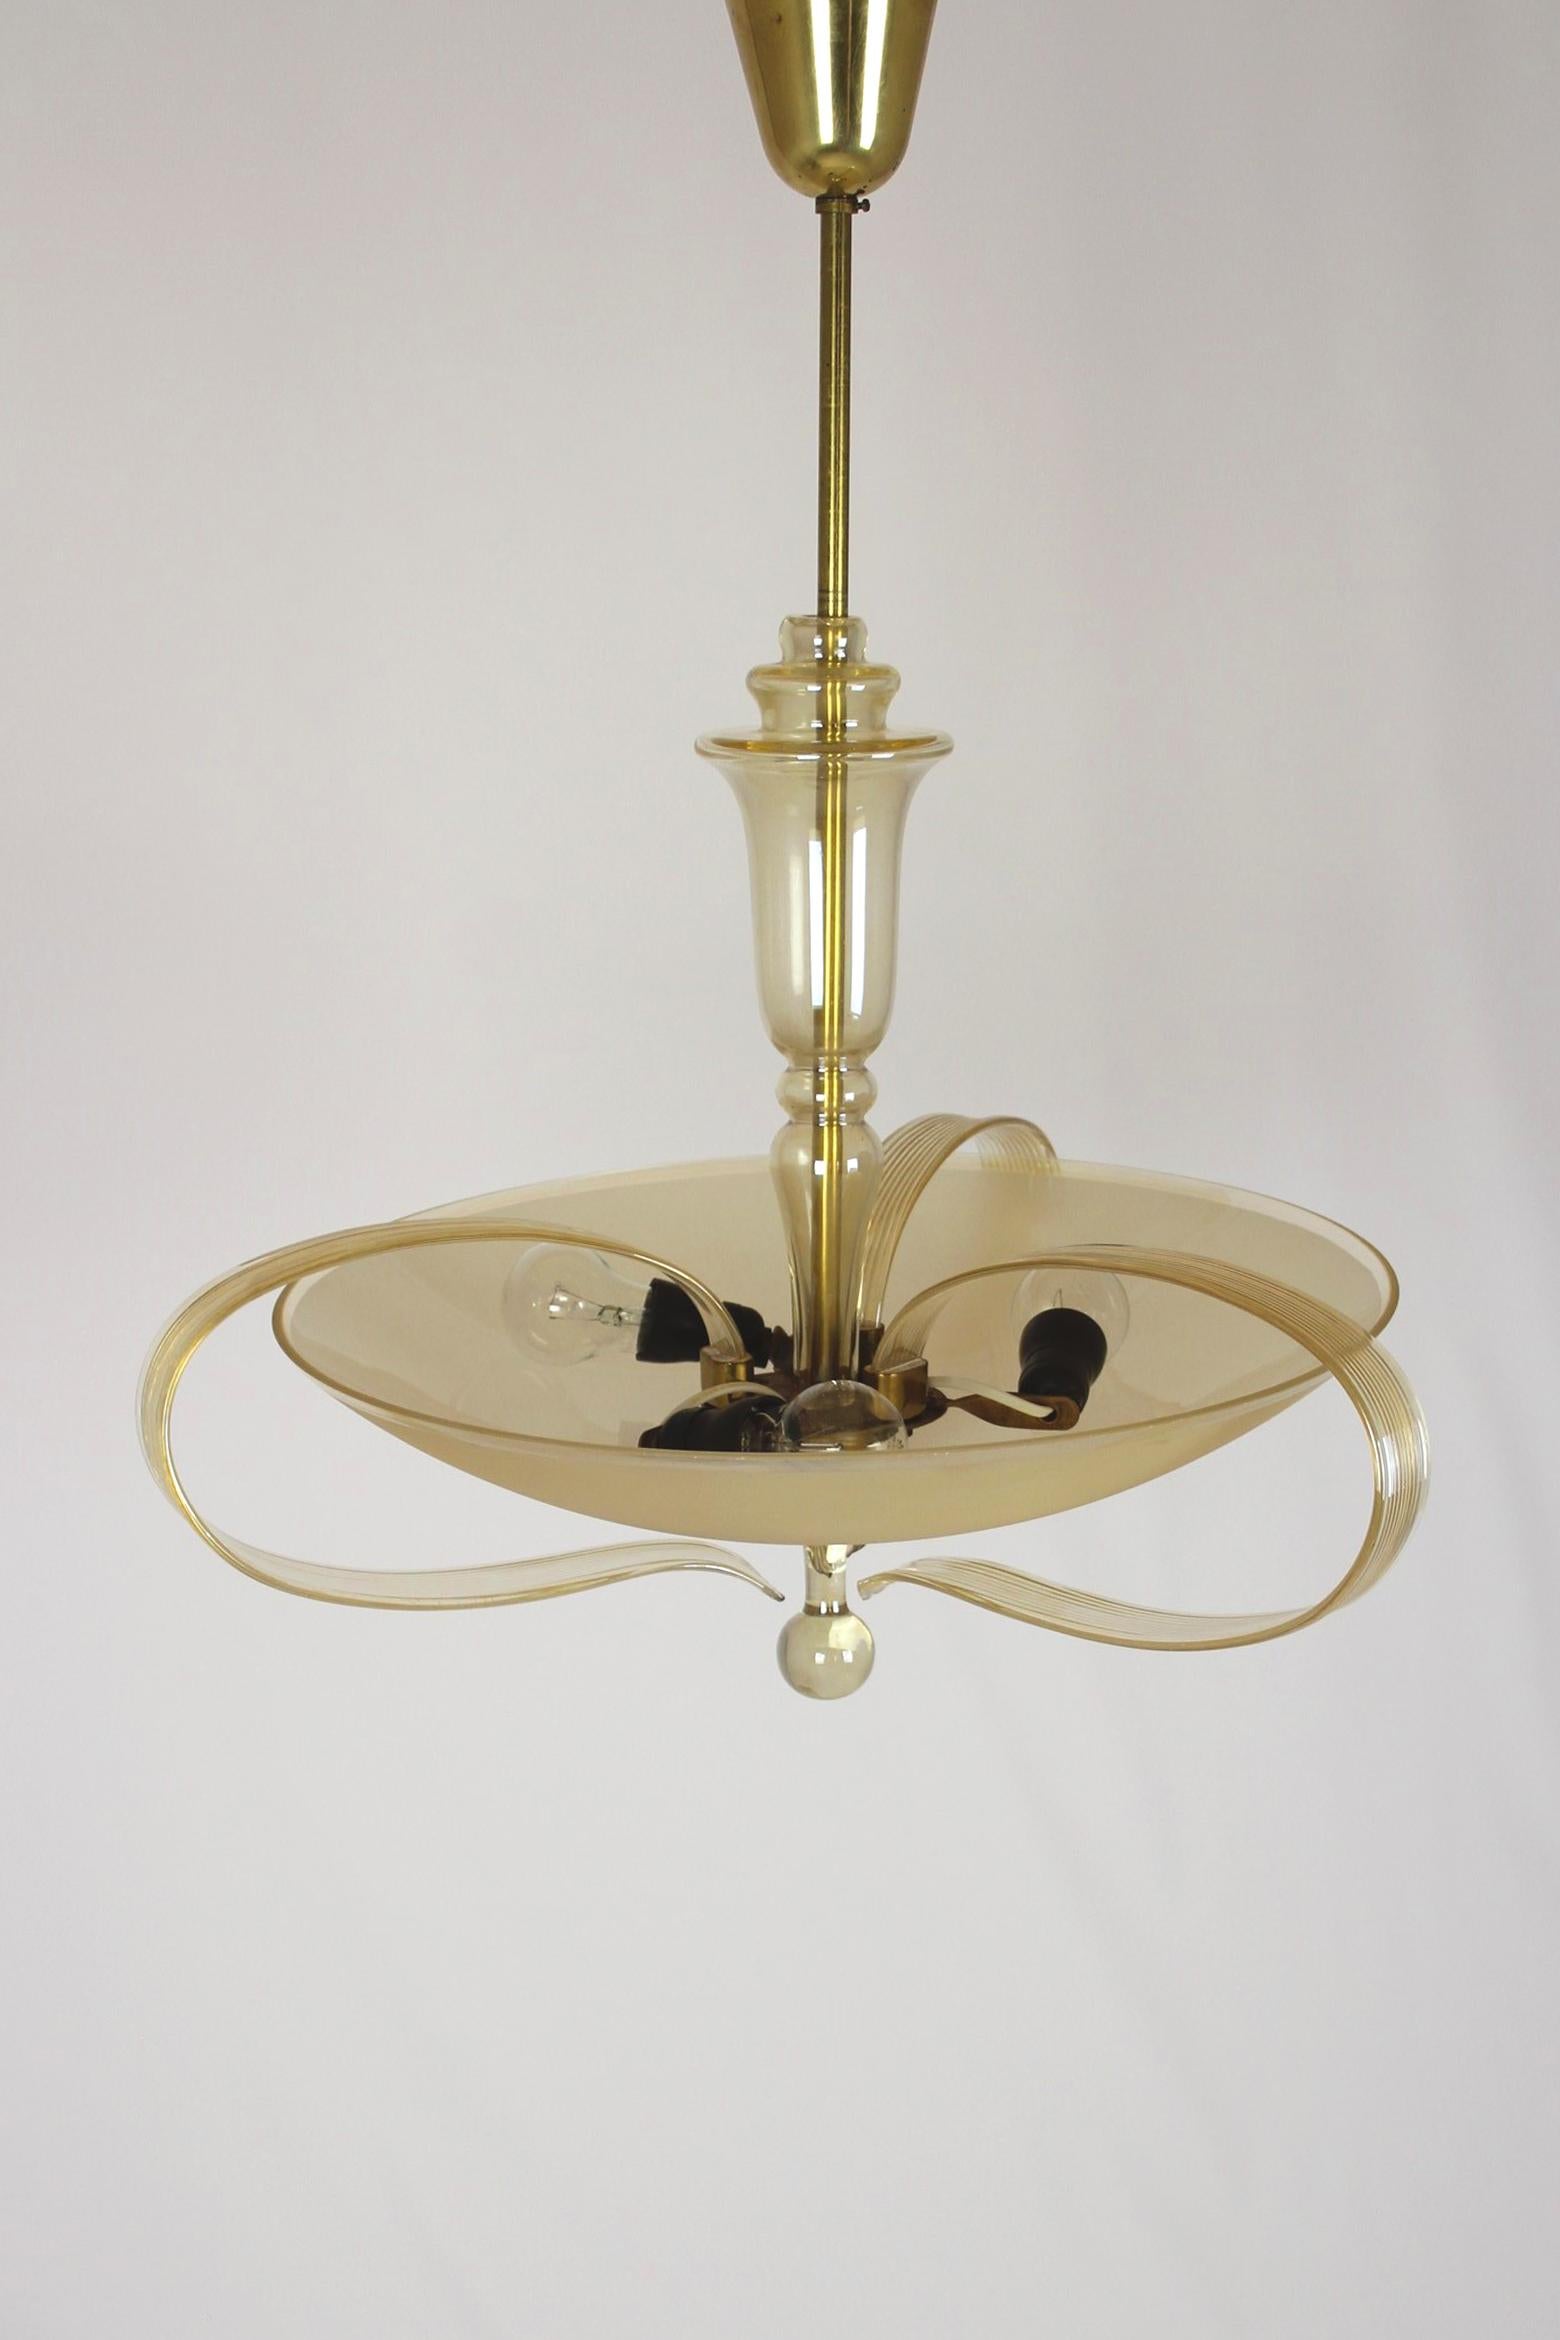 Brass and Curved Glass Chandelier from ESC Zukov, 1940s In Good Condition For Sale In Żory, PL